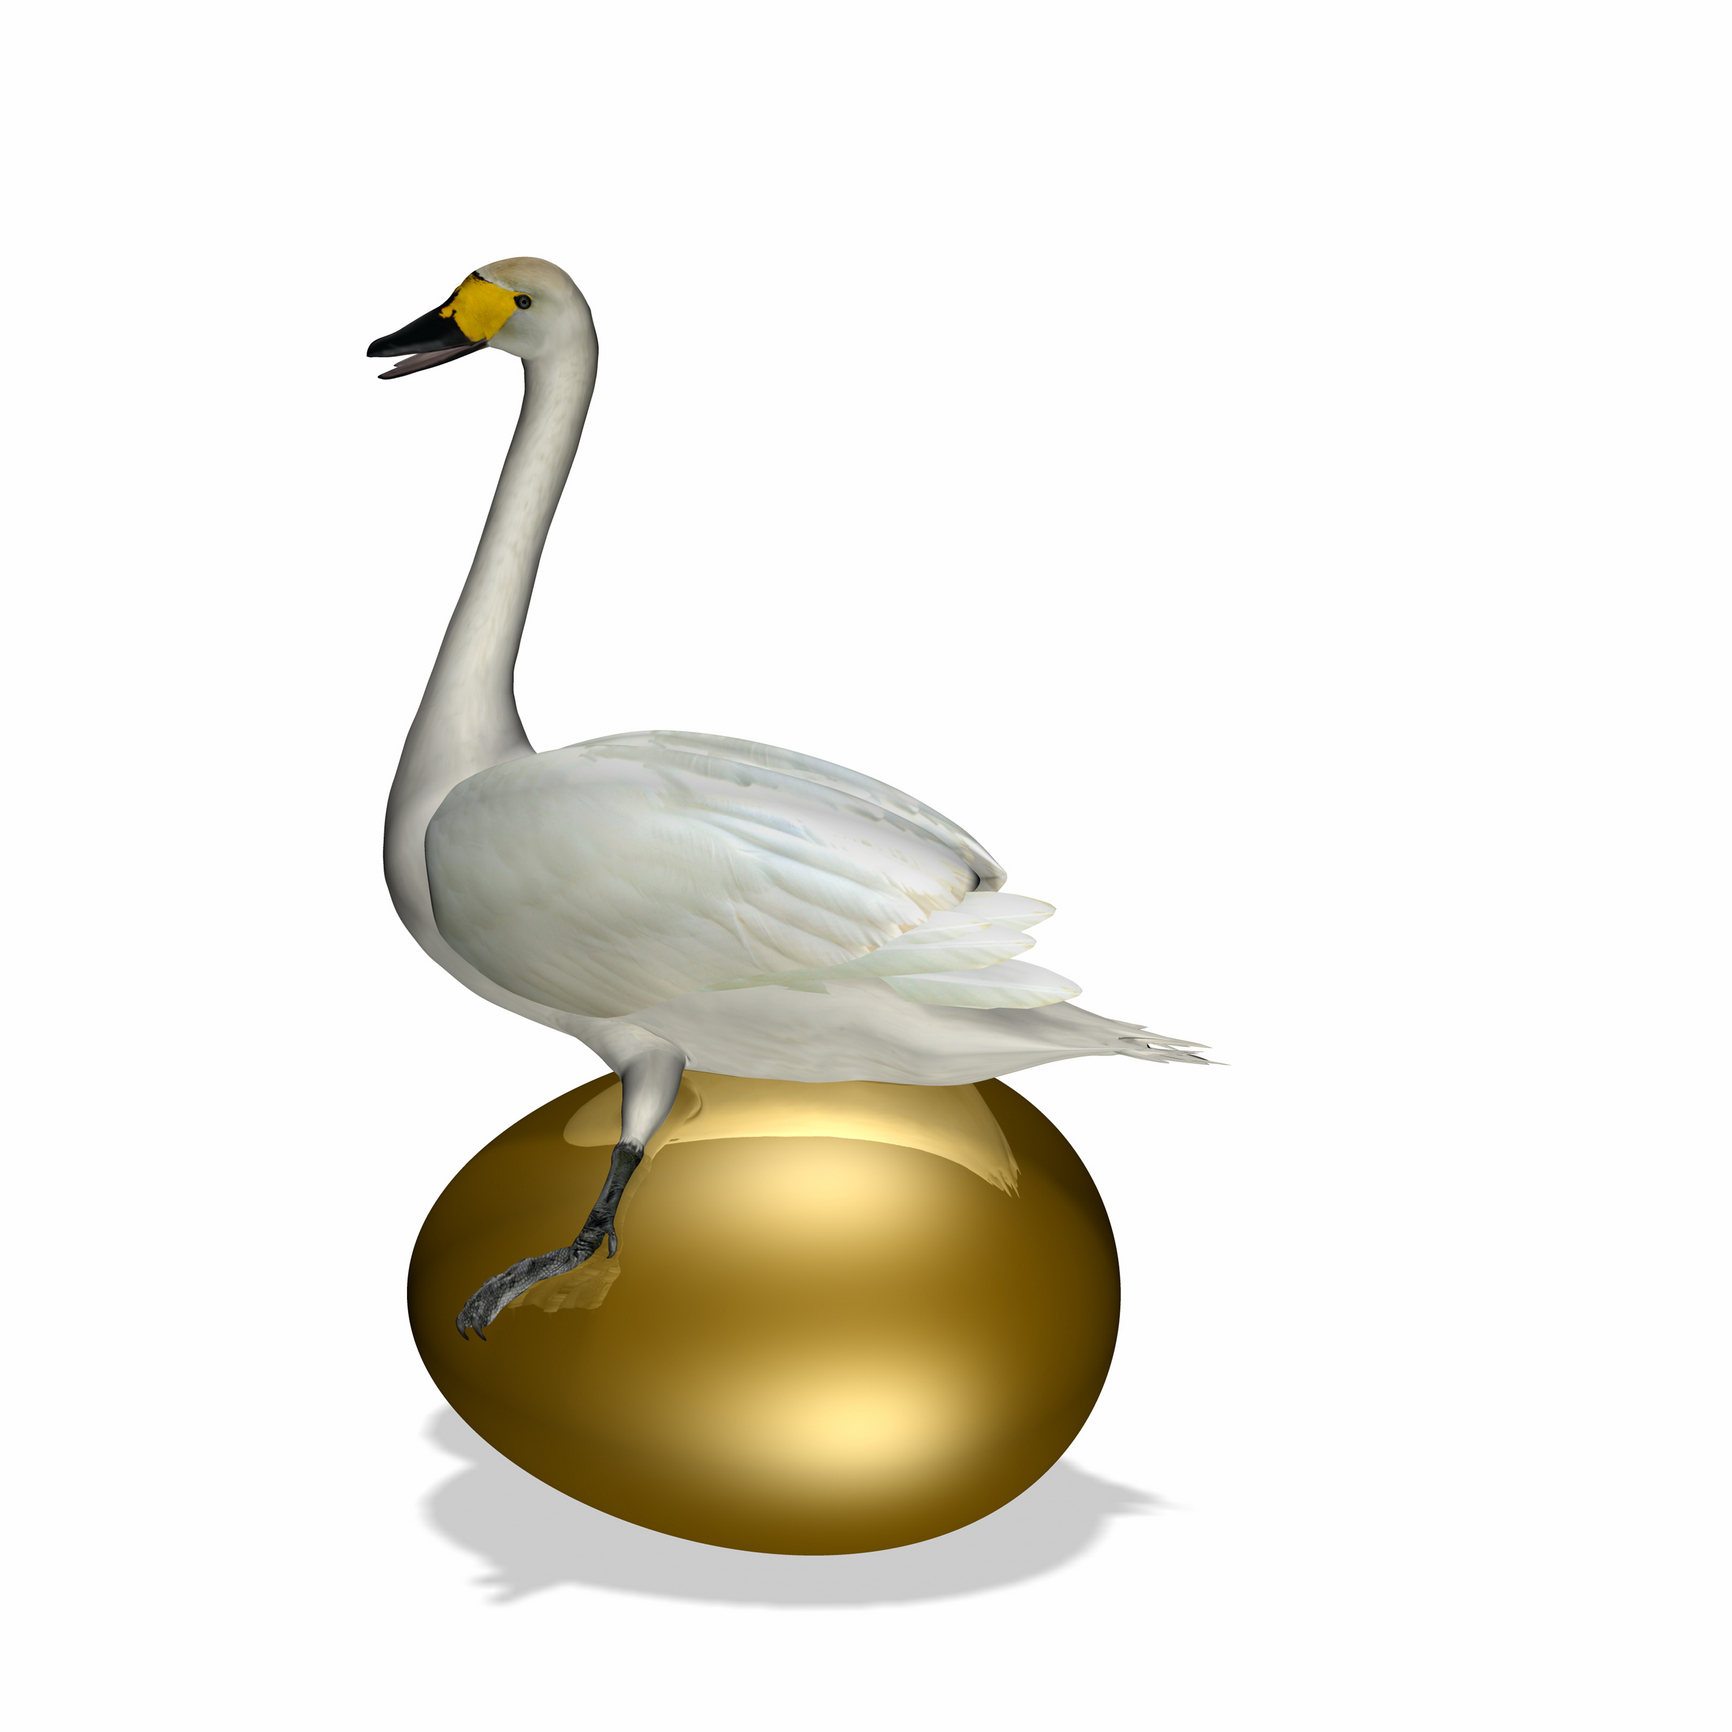 The Golden Goose - The Story Home Children's Audio Stories